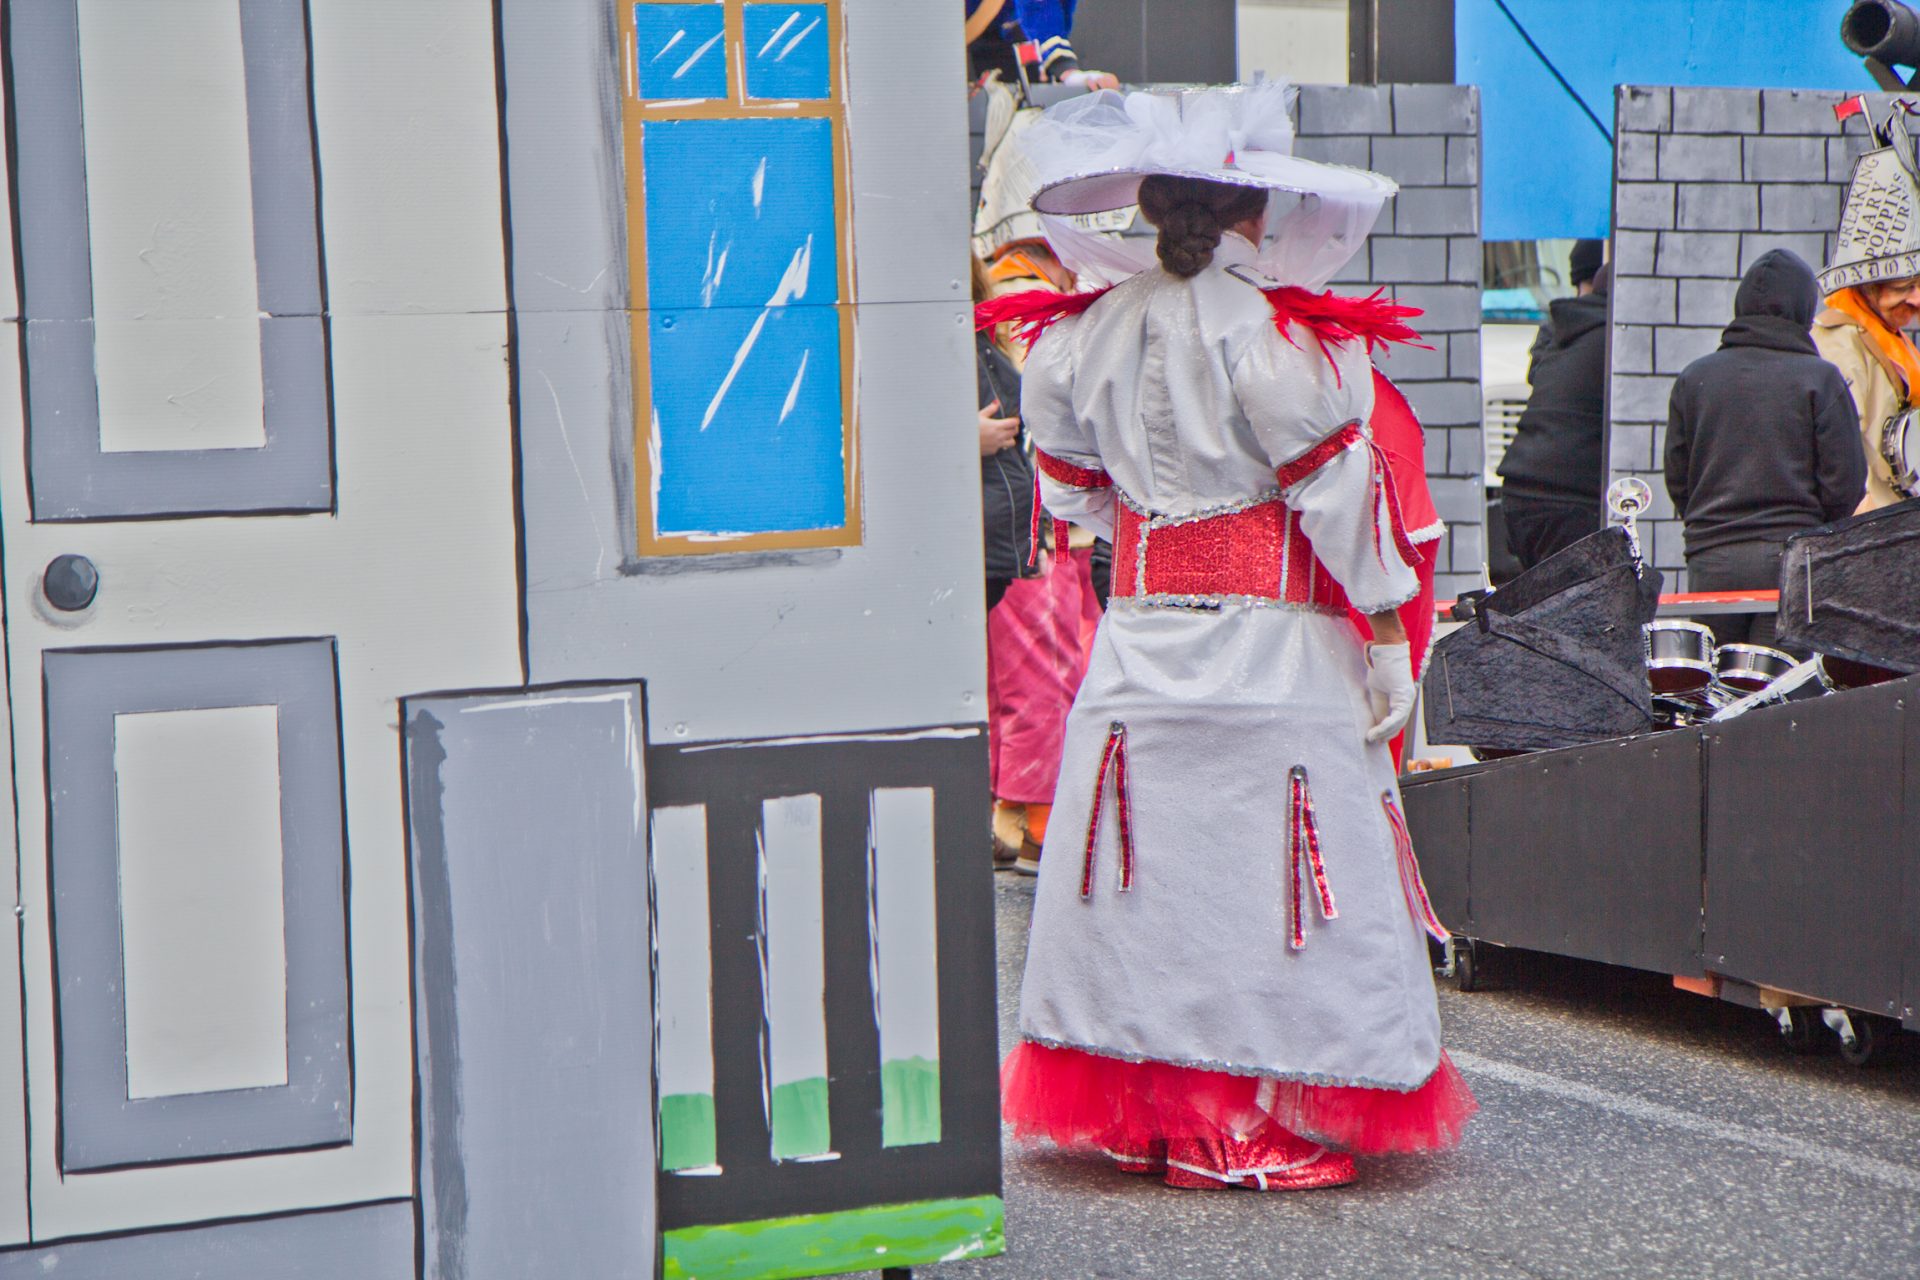 Jimmy Driadon, captain of the Greater Overbook String Band, celebrate’s his 70th parade dressed up as Mary Poppins.